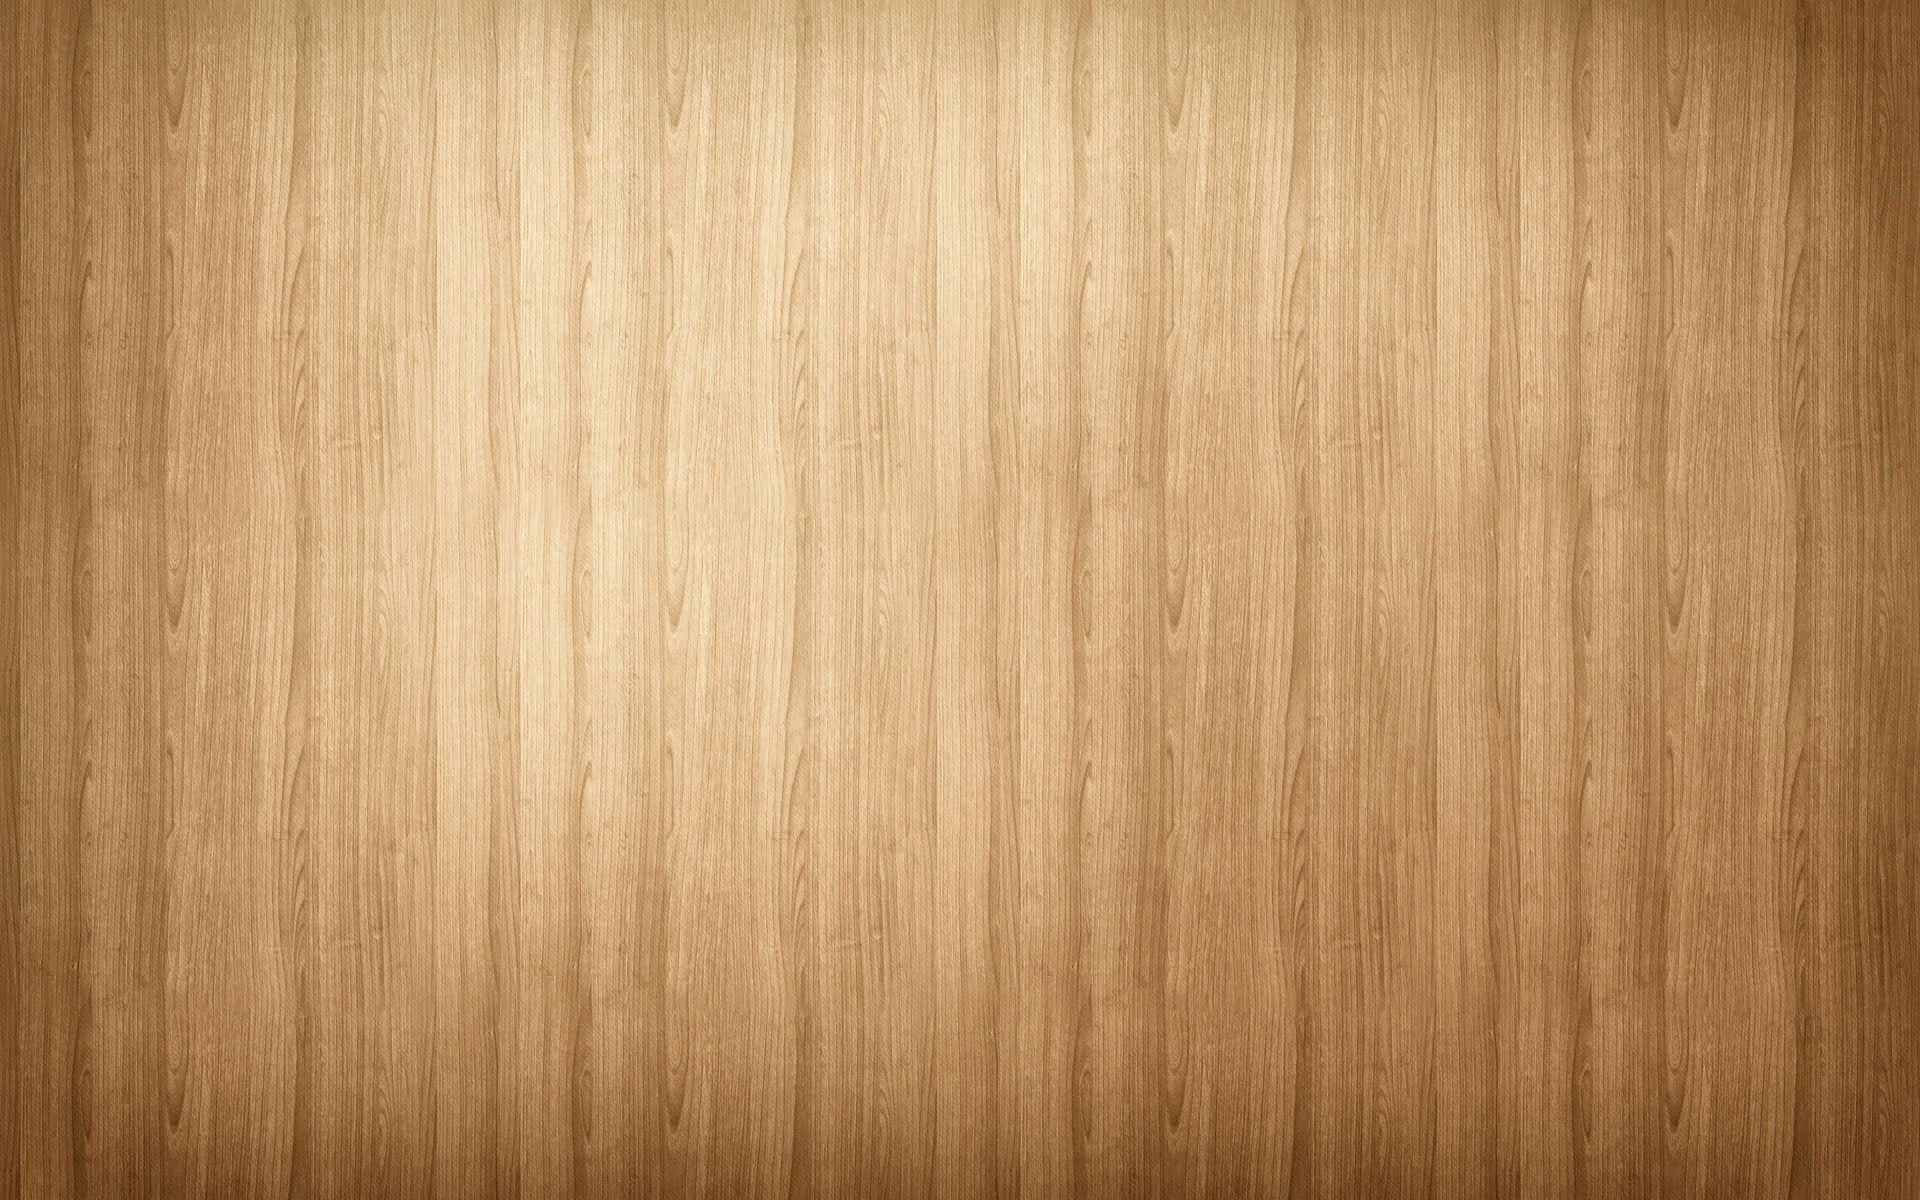 Smooth Panel Wooden Background Texture